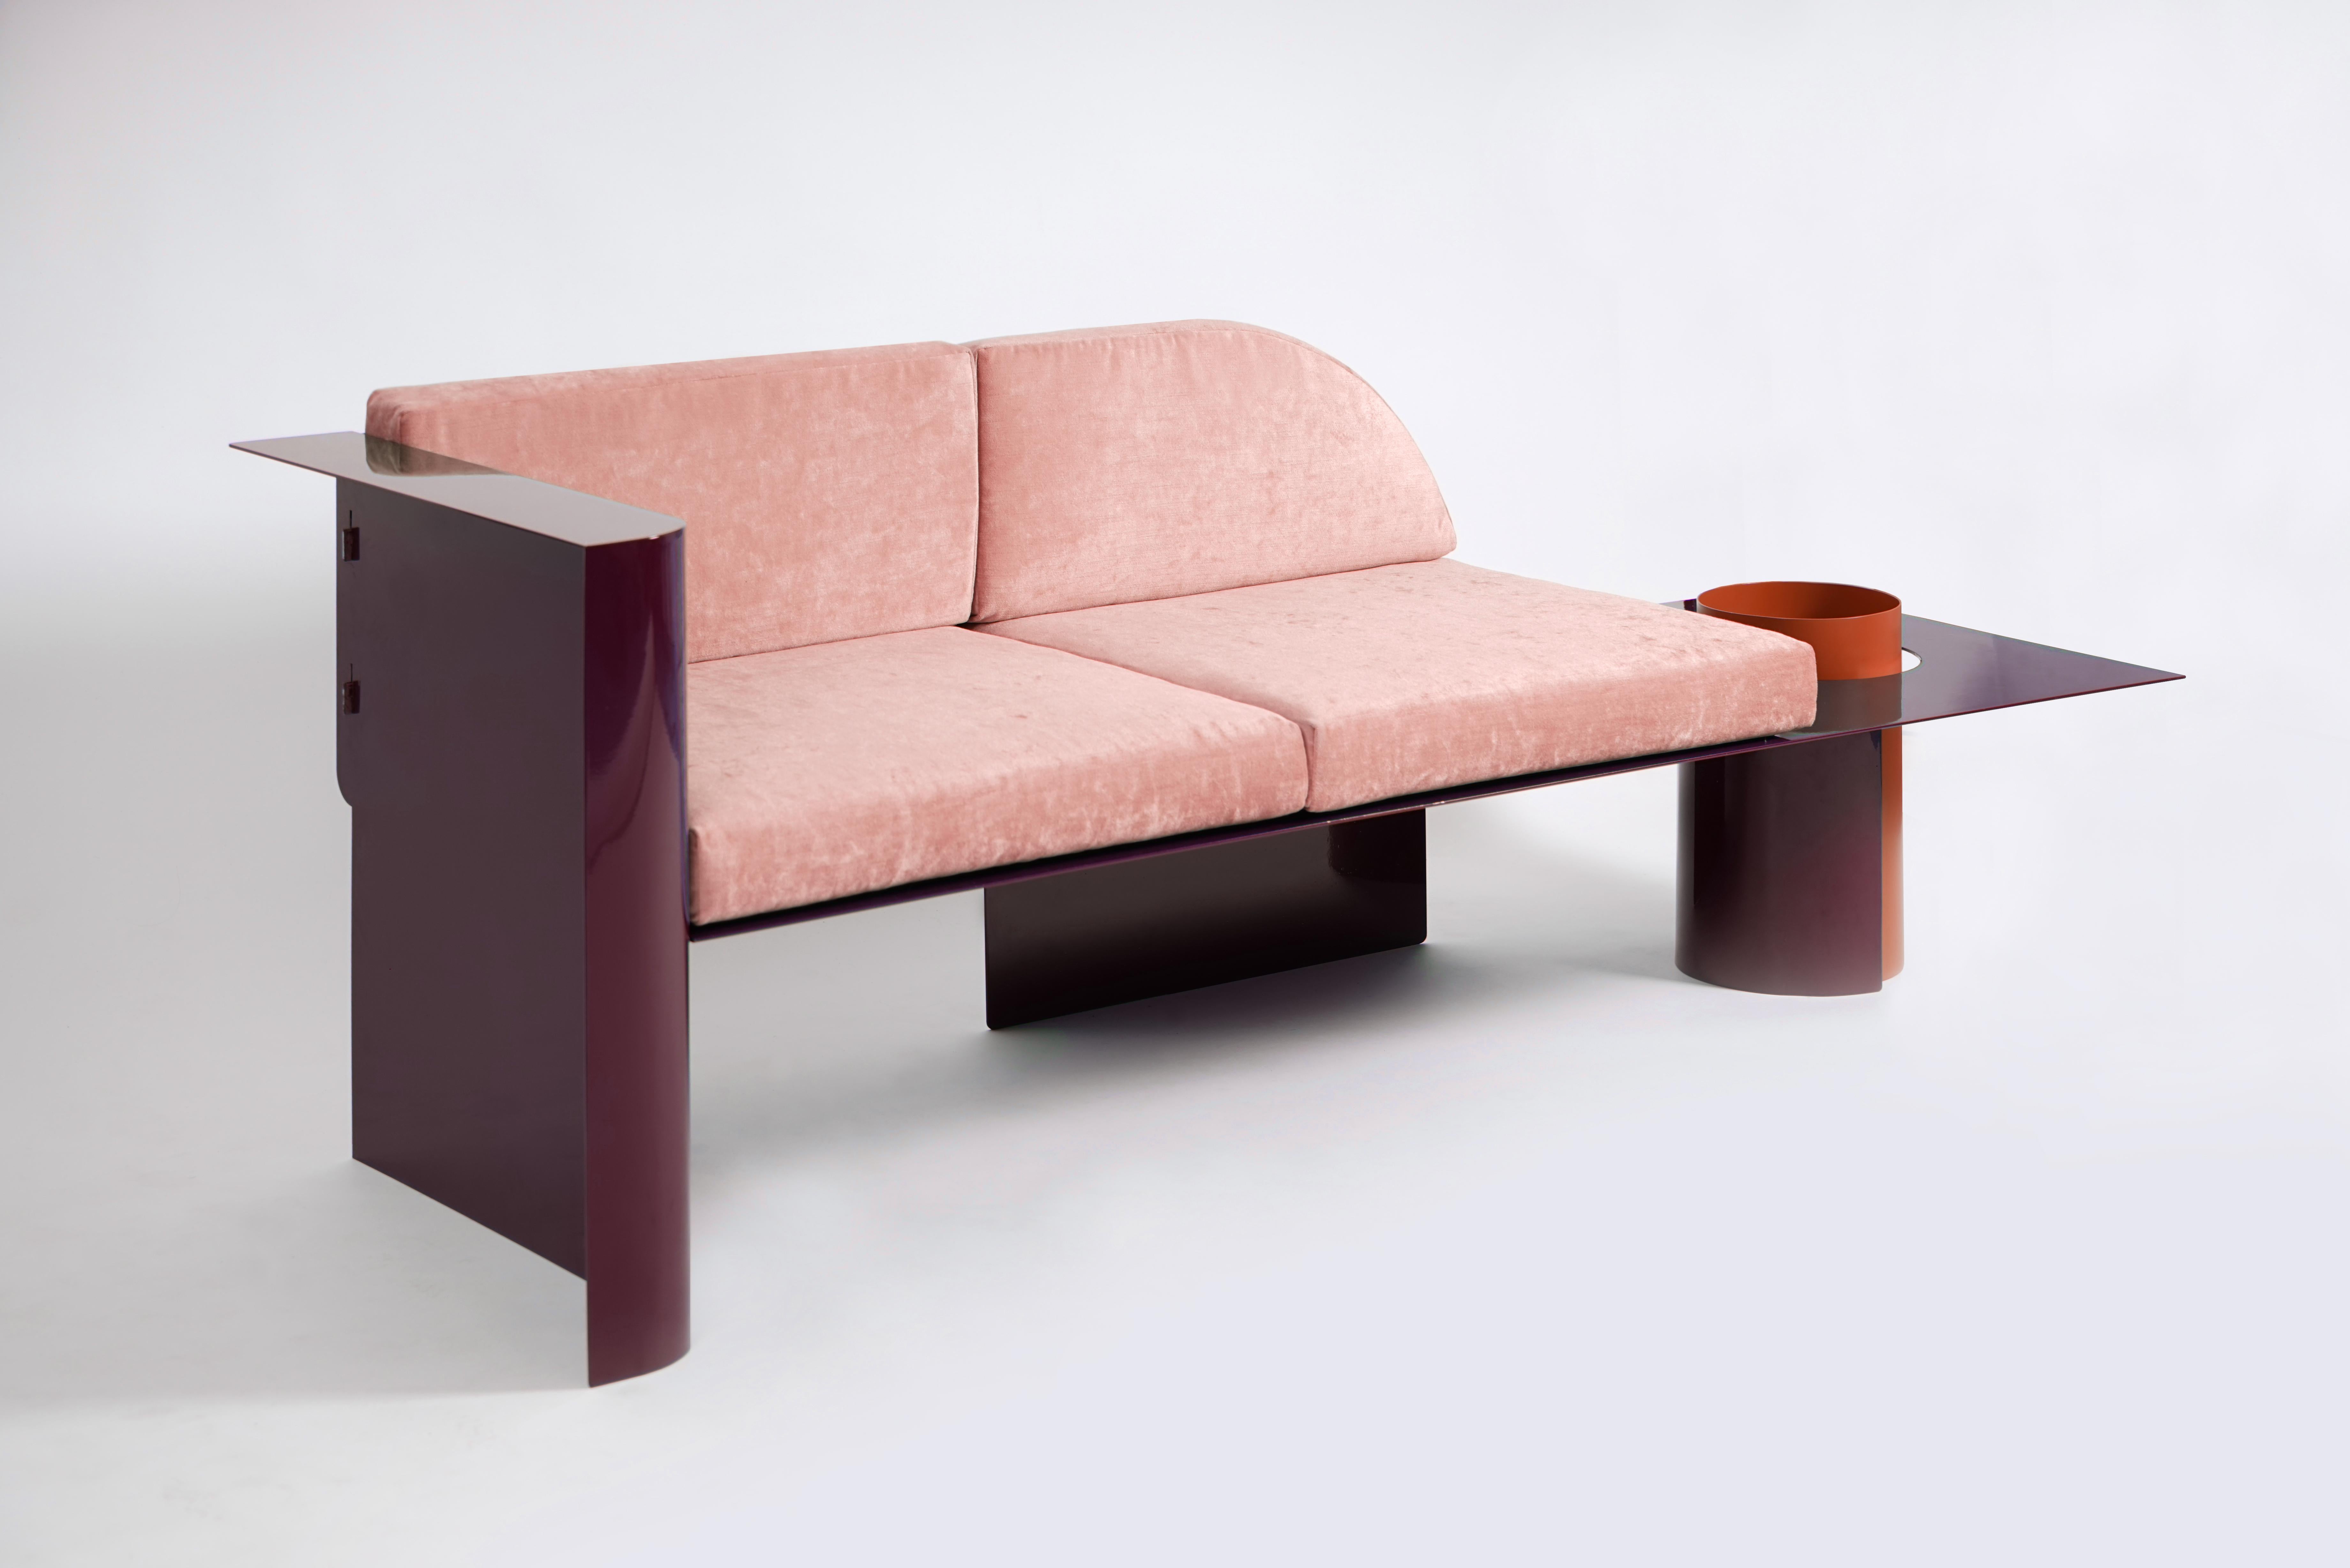 This Avant Garde sofa is made of high quality powder-coated steel. The sofa can be complemented by a plant in a special pot-leg. Also, the sofa can be used with or without back cushions.
